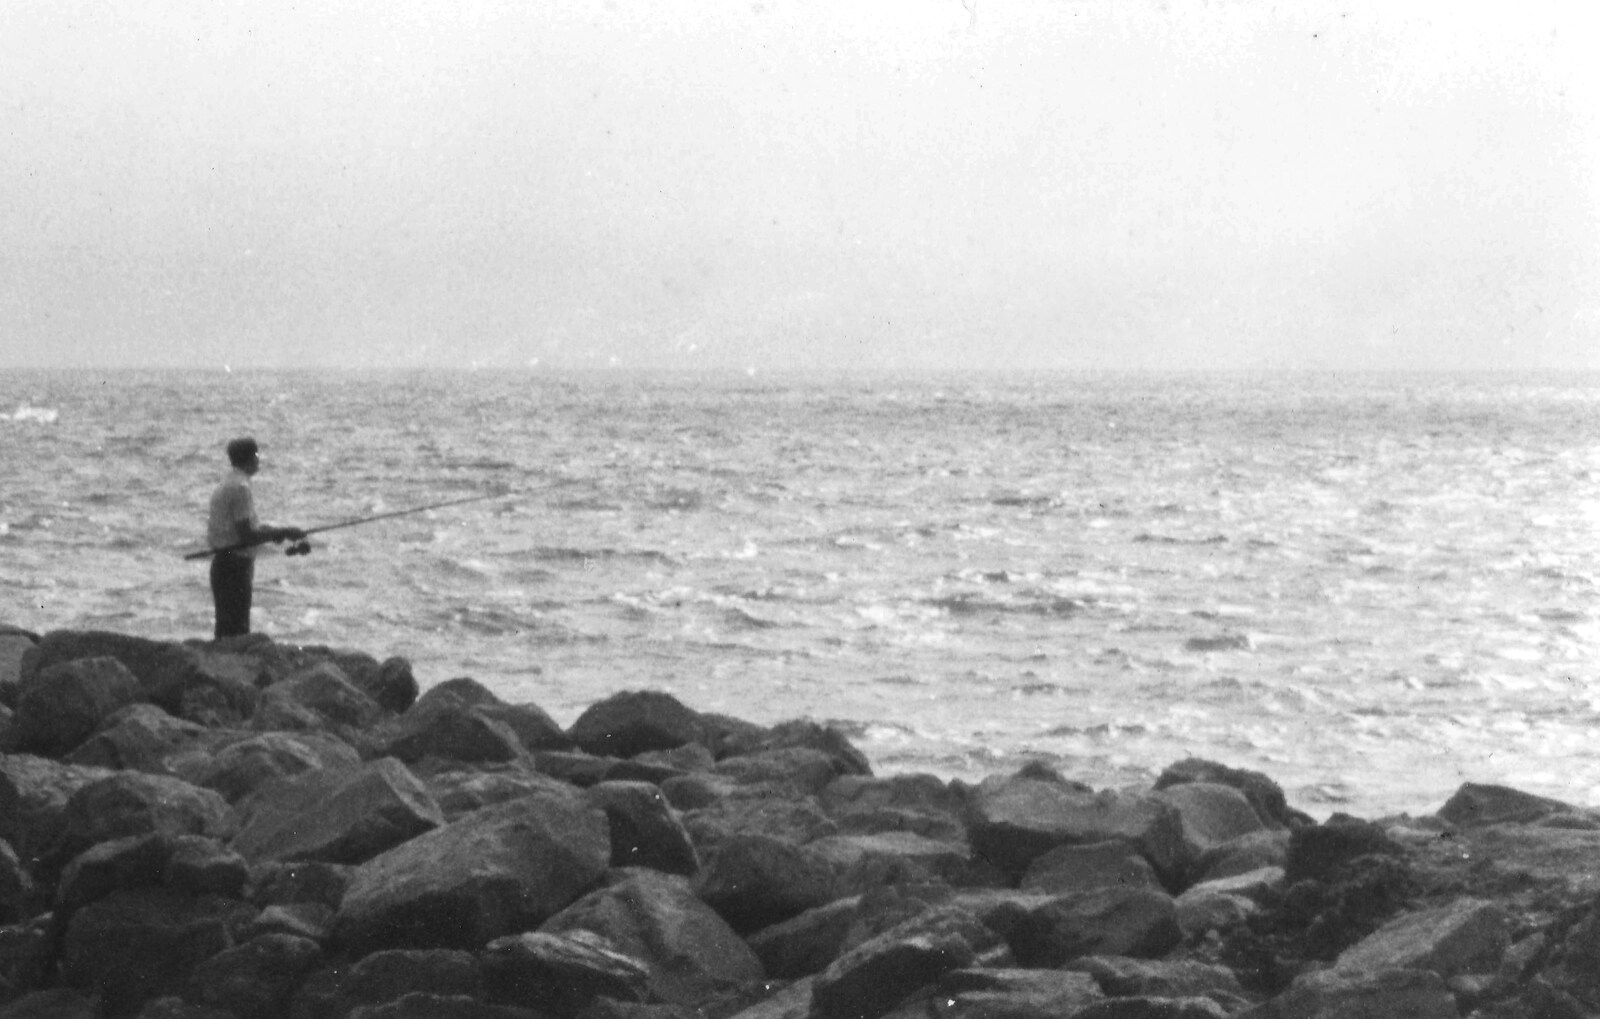 Fishing off the groynes at Barton from Life in Ford Cottage and Barton on Sea, Hampshire - 2nd April 1985